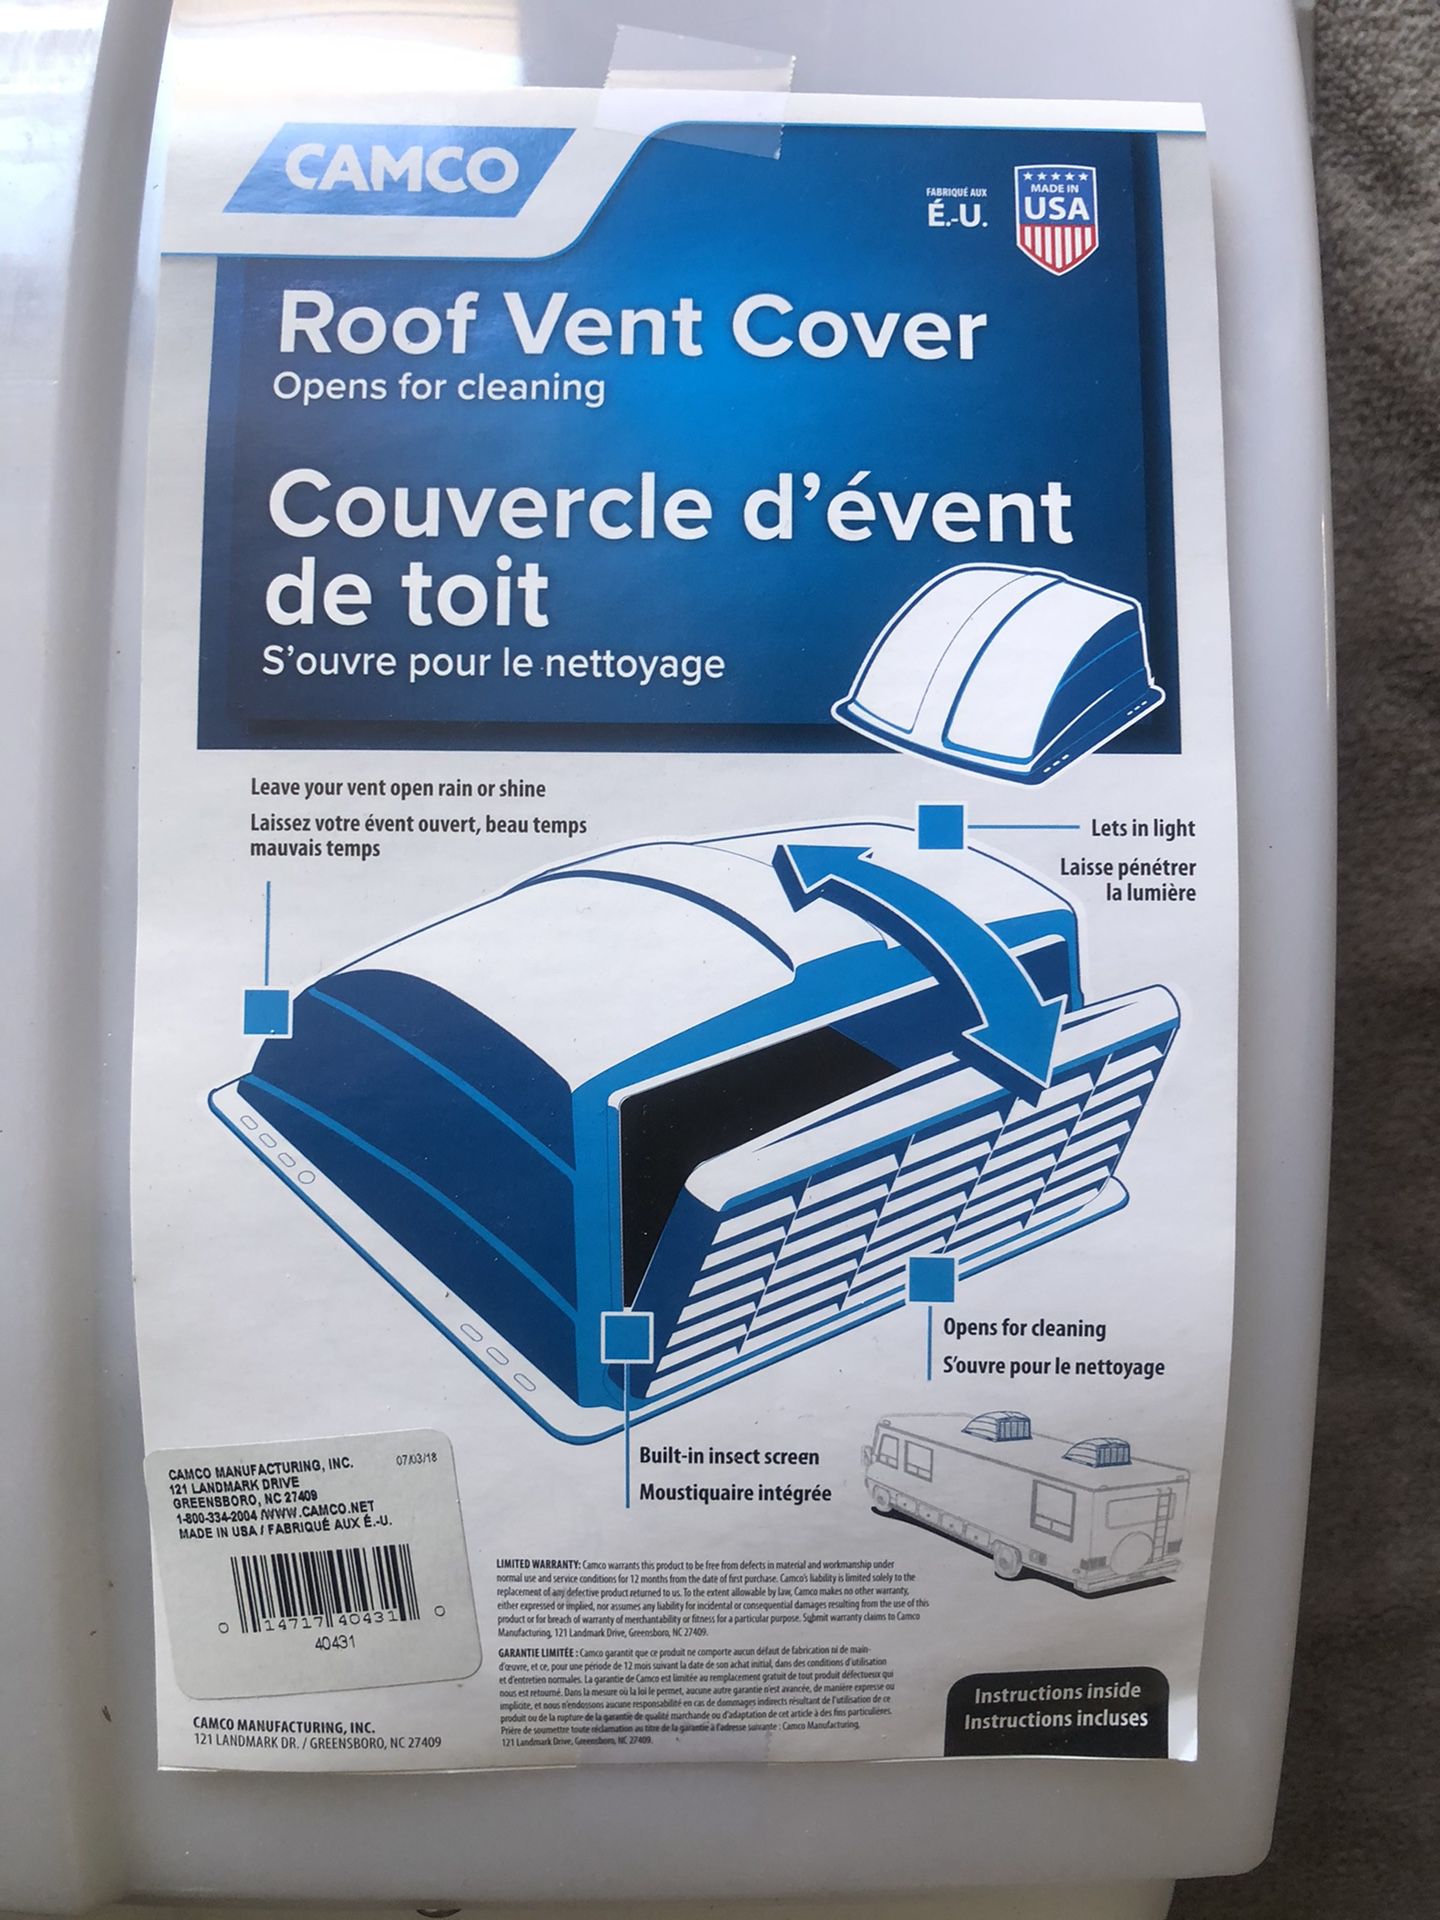 RV or trailer Vent roof cover